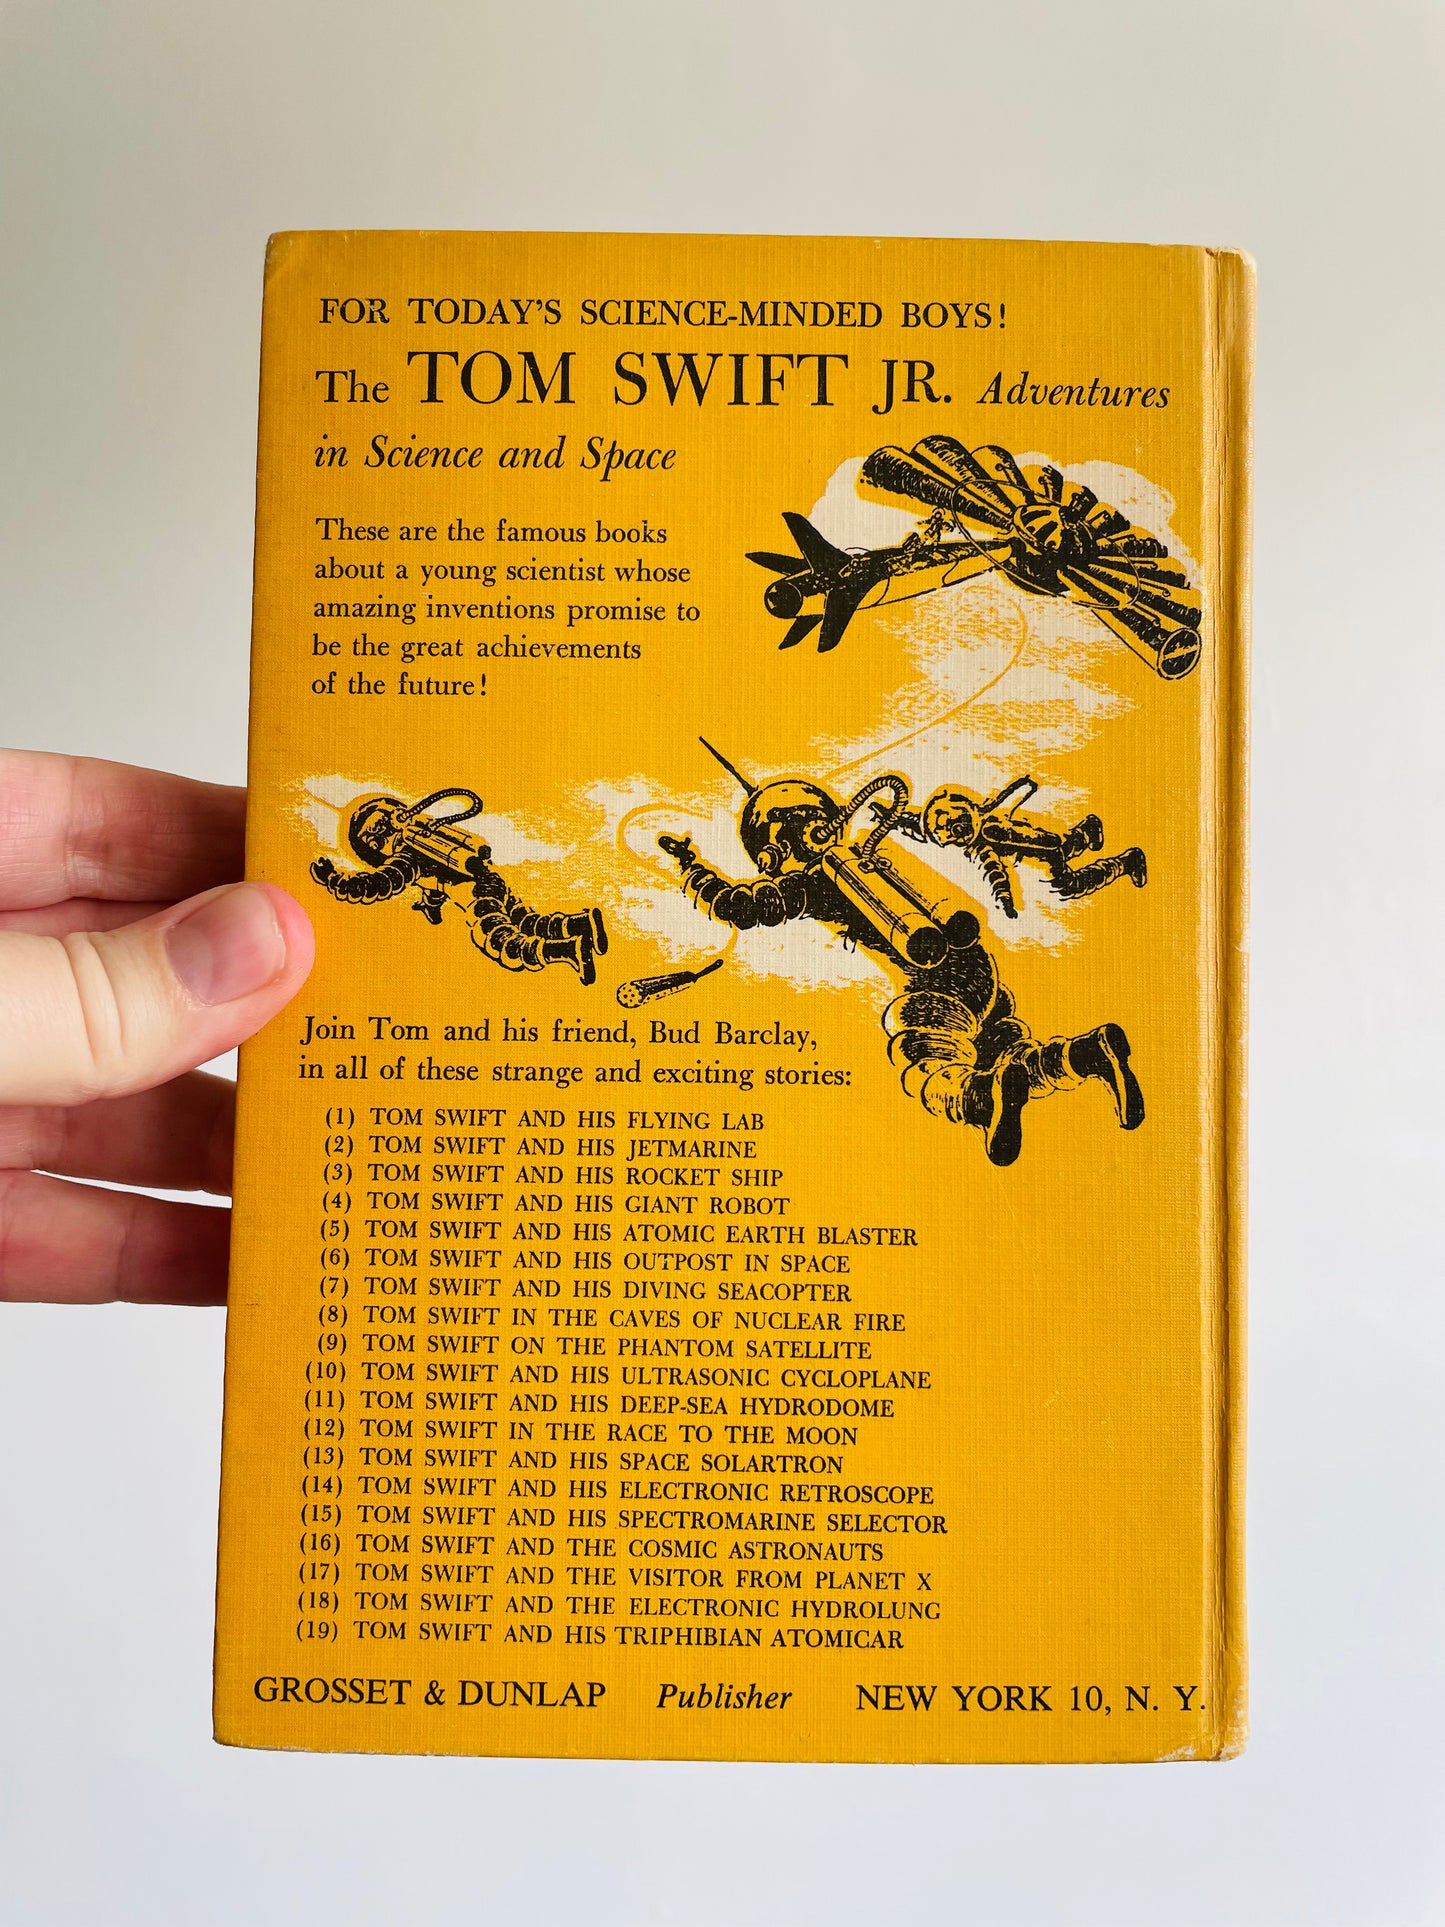 Tom Swift and His Giant Robot Hardcover Book by Victor Appleton II (1954)